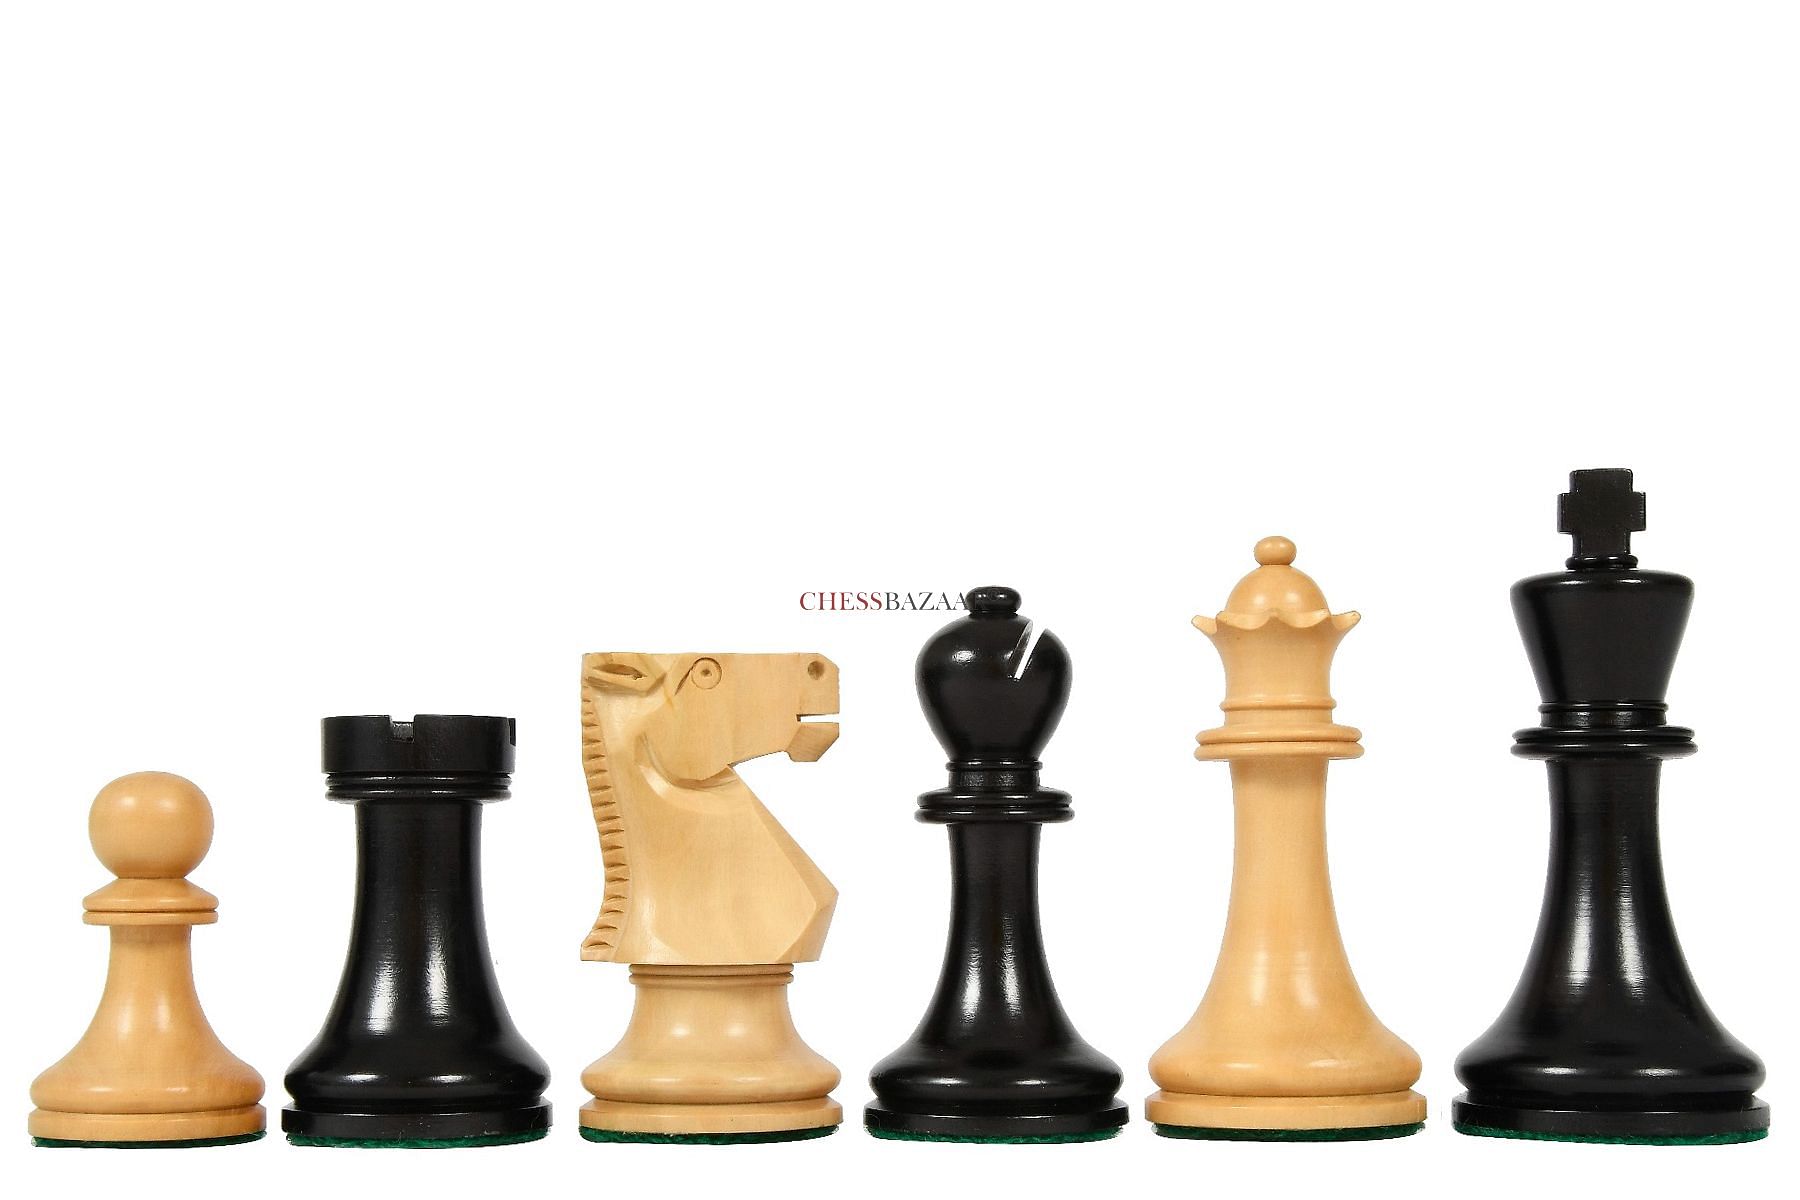 We Games English Staunton Tournament Chess Pieces In Wooden Box